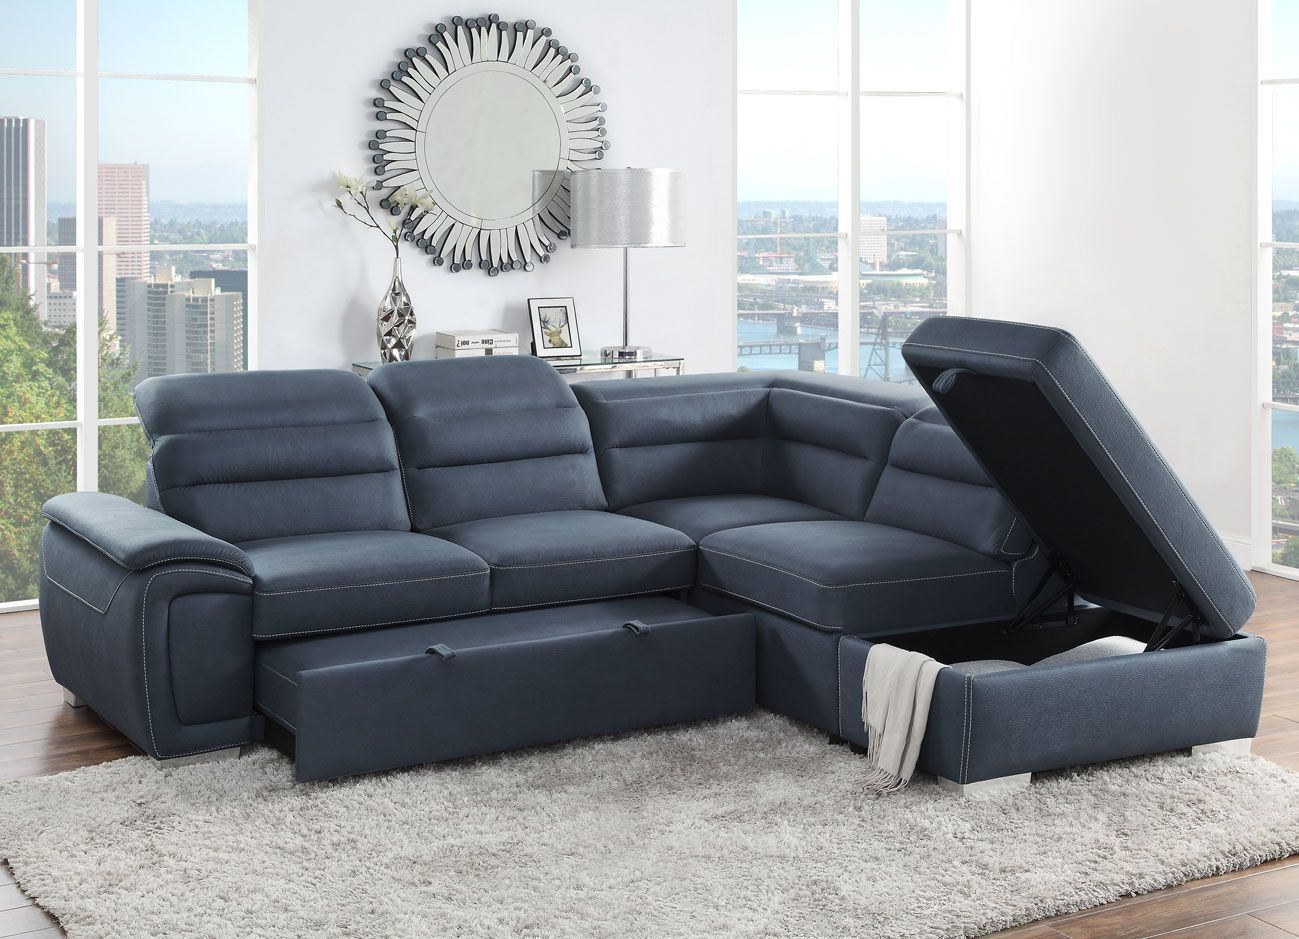 Maura Blue Fabric Sectional With Storage